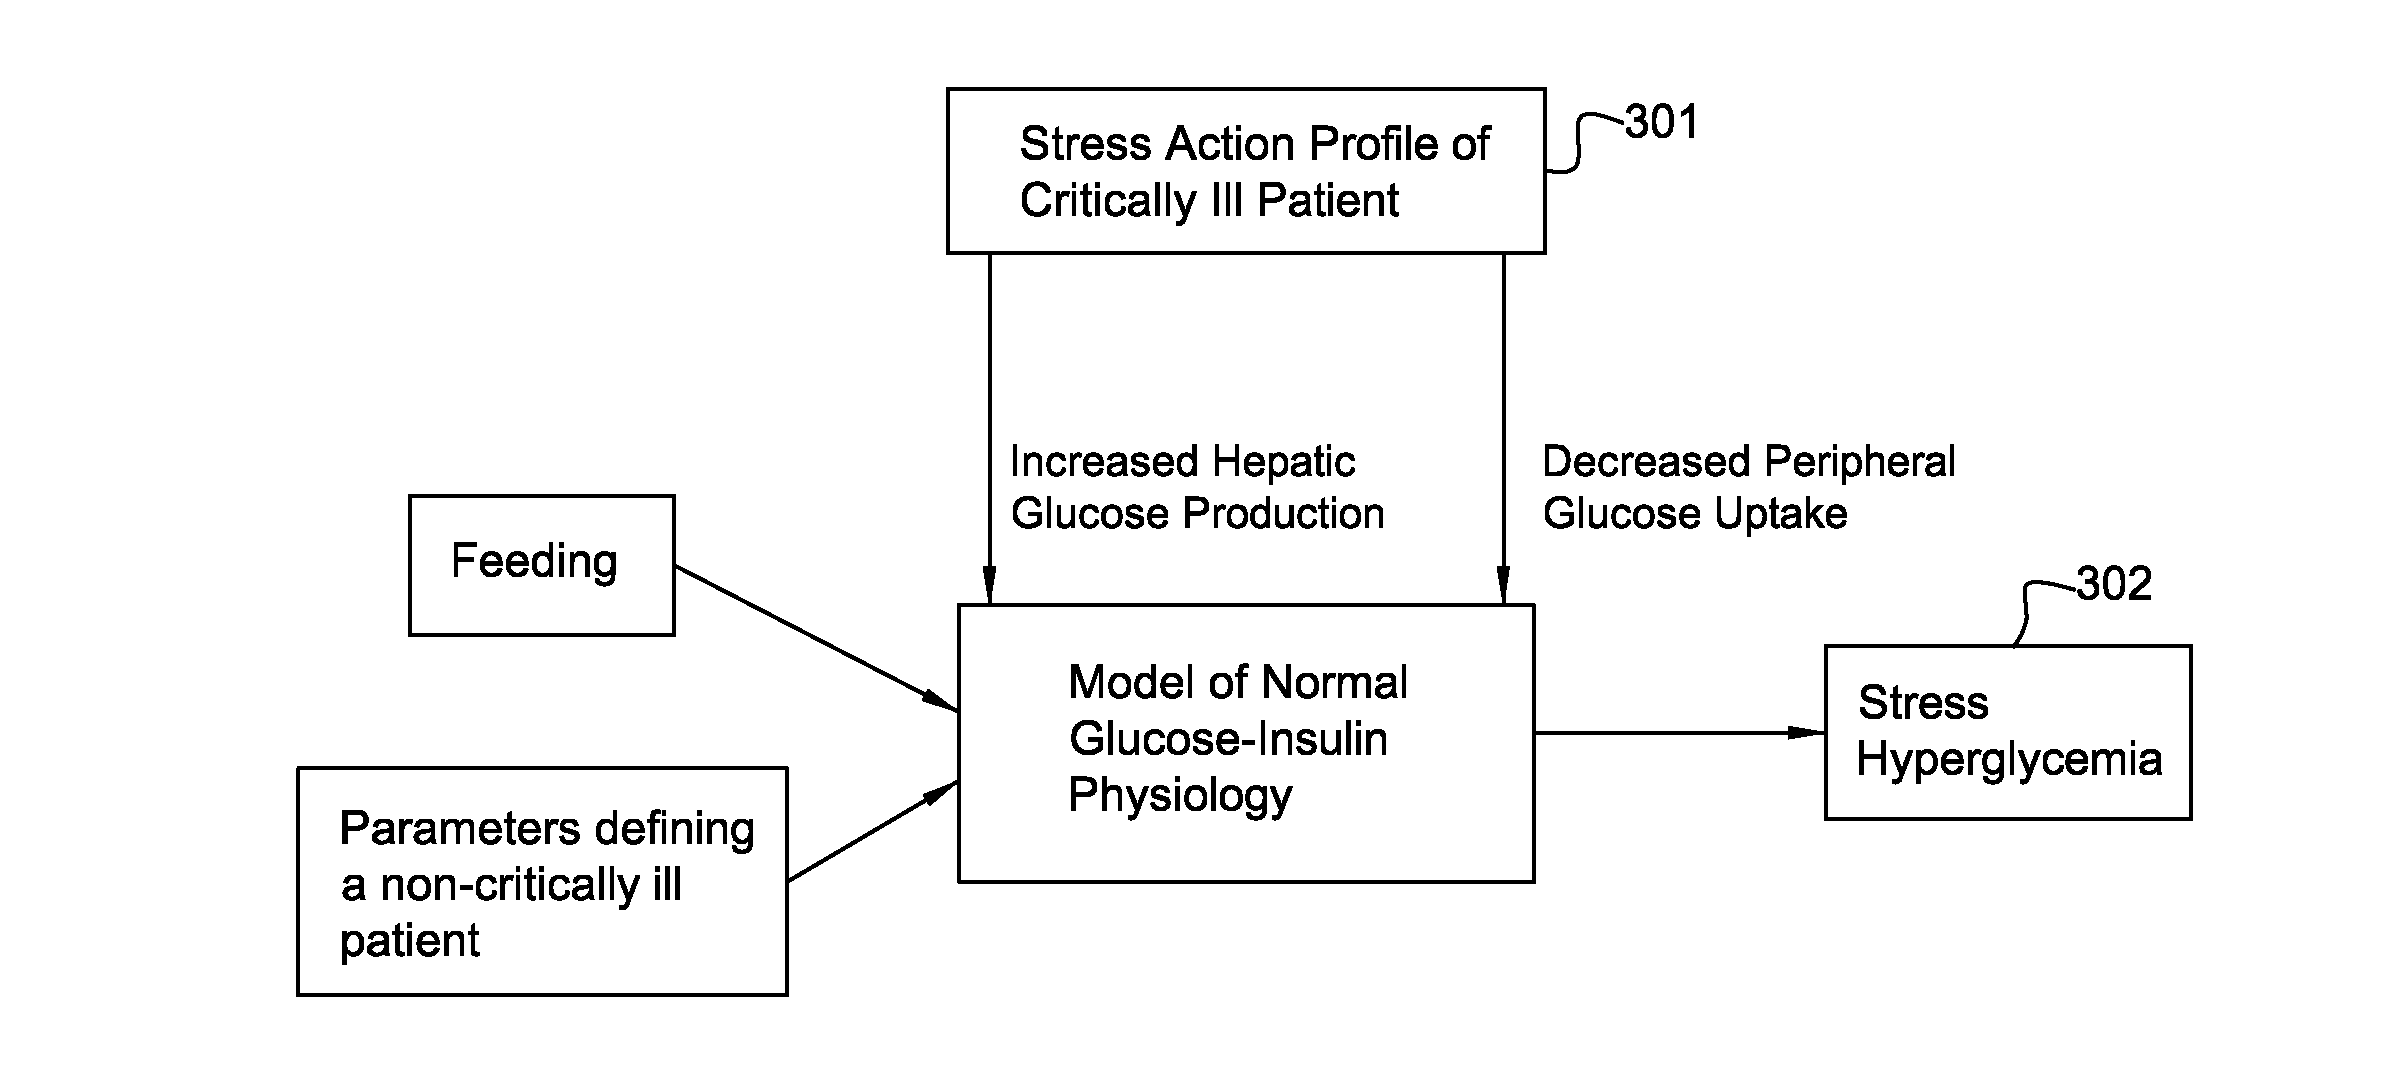 Computer Simulation for Testing and Monitoring of Treatment Strategies for Stress Hyperglycemia